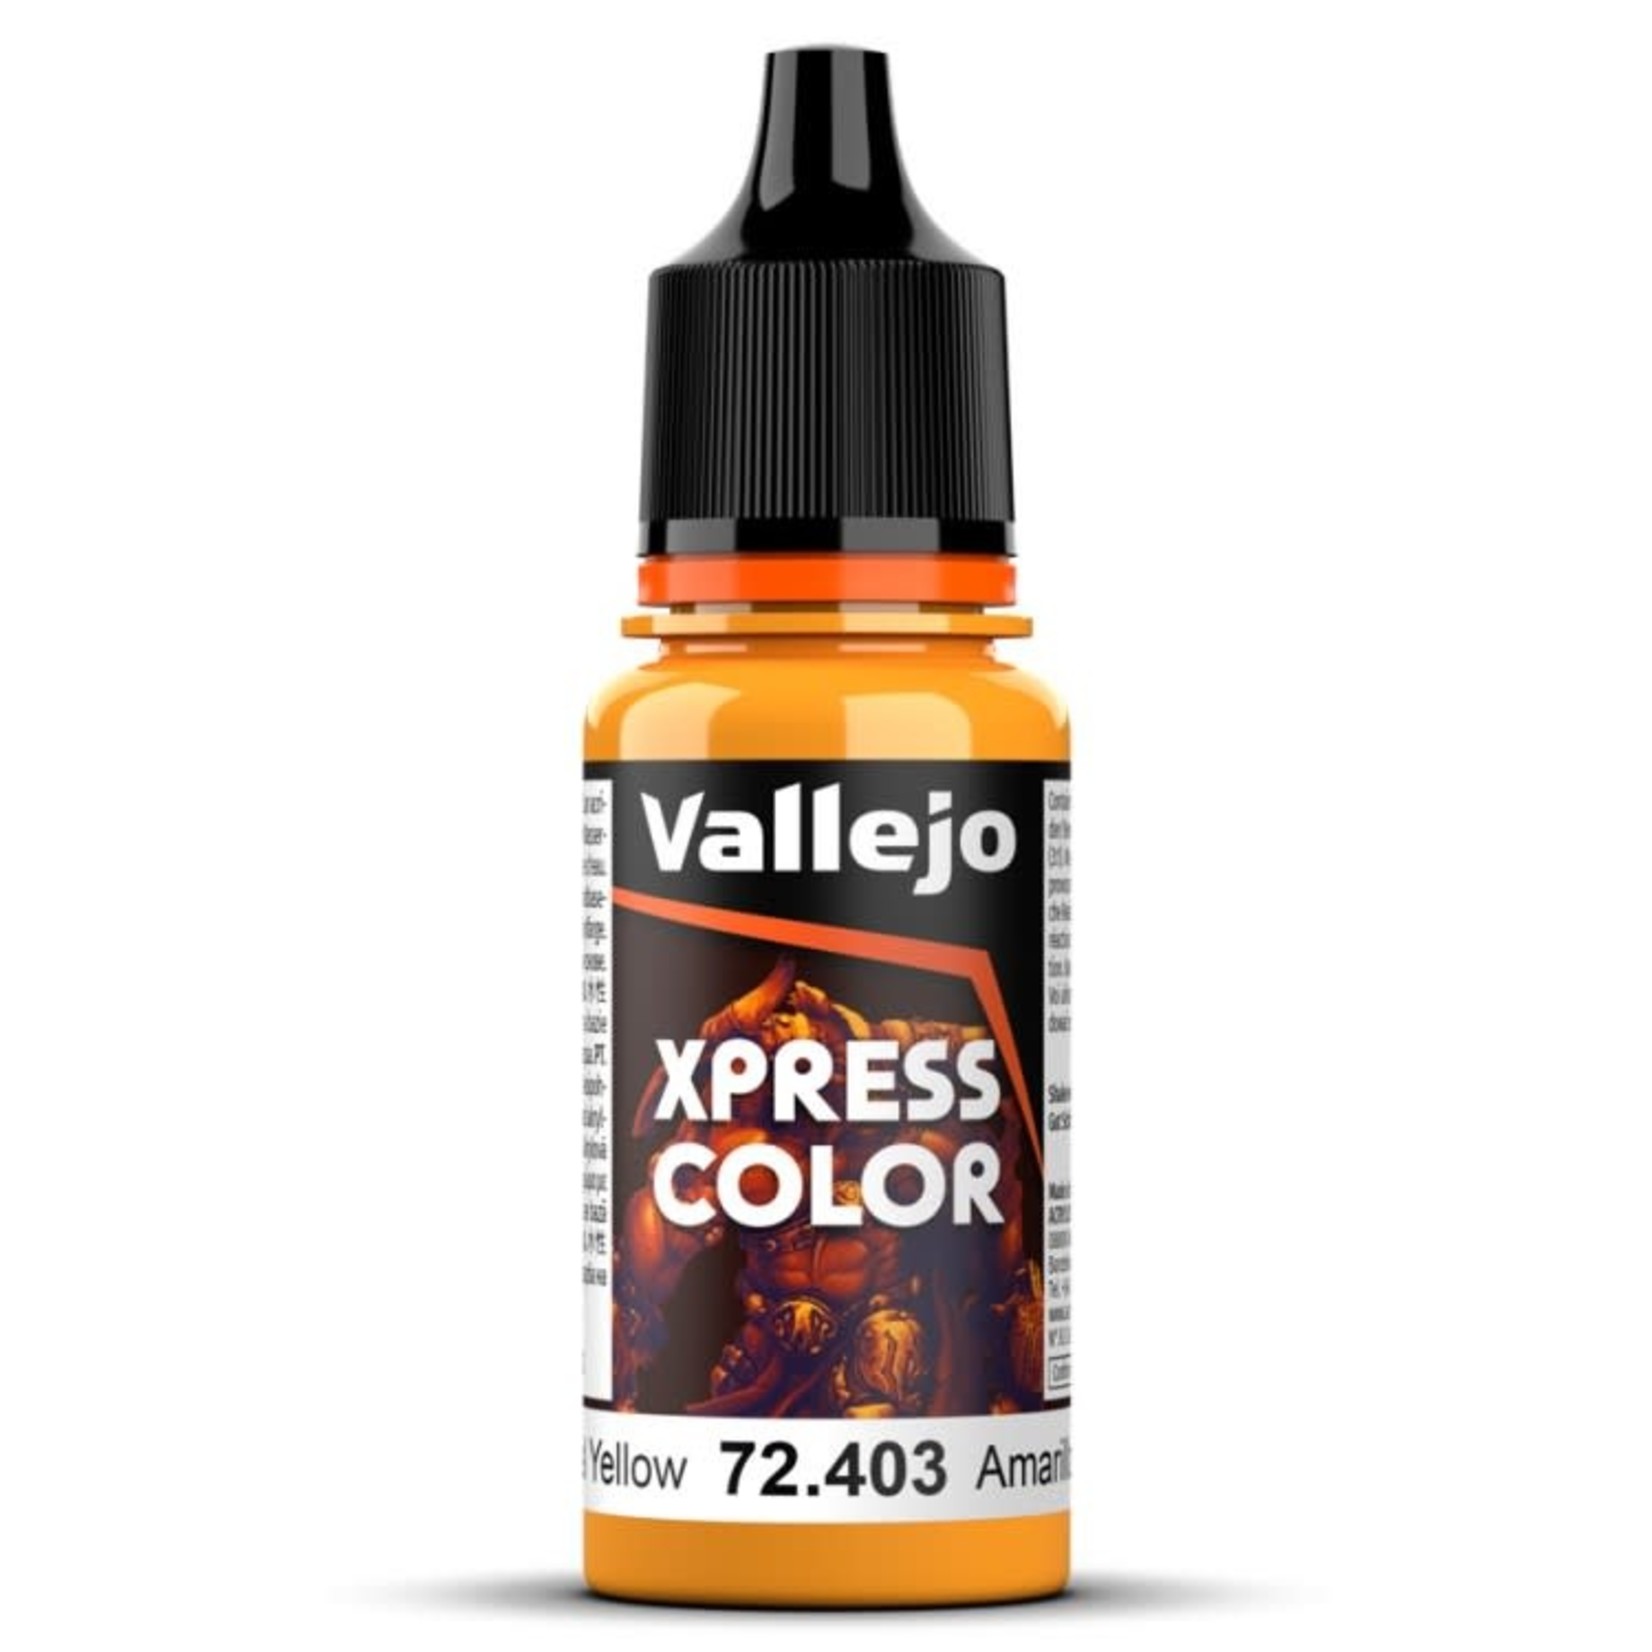 Vallejo Paint: Xpress (Imperial Yellow)